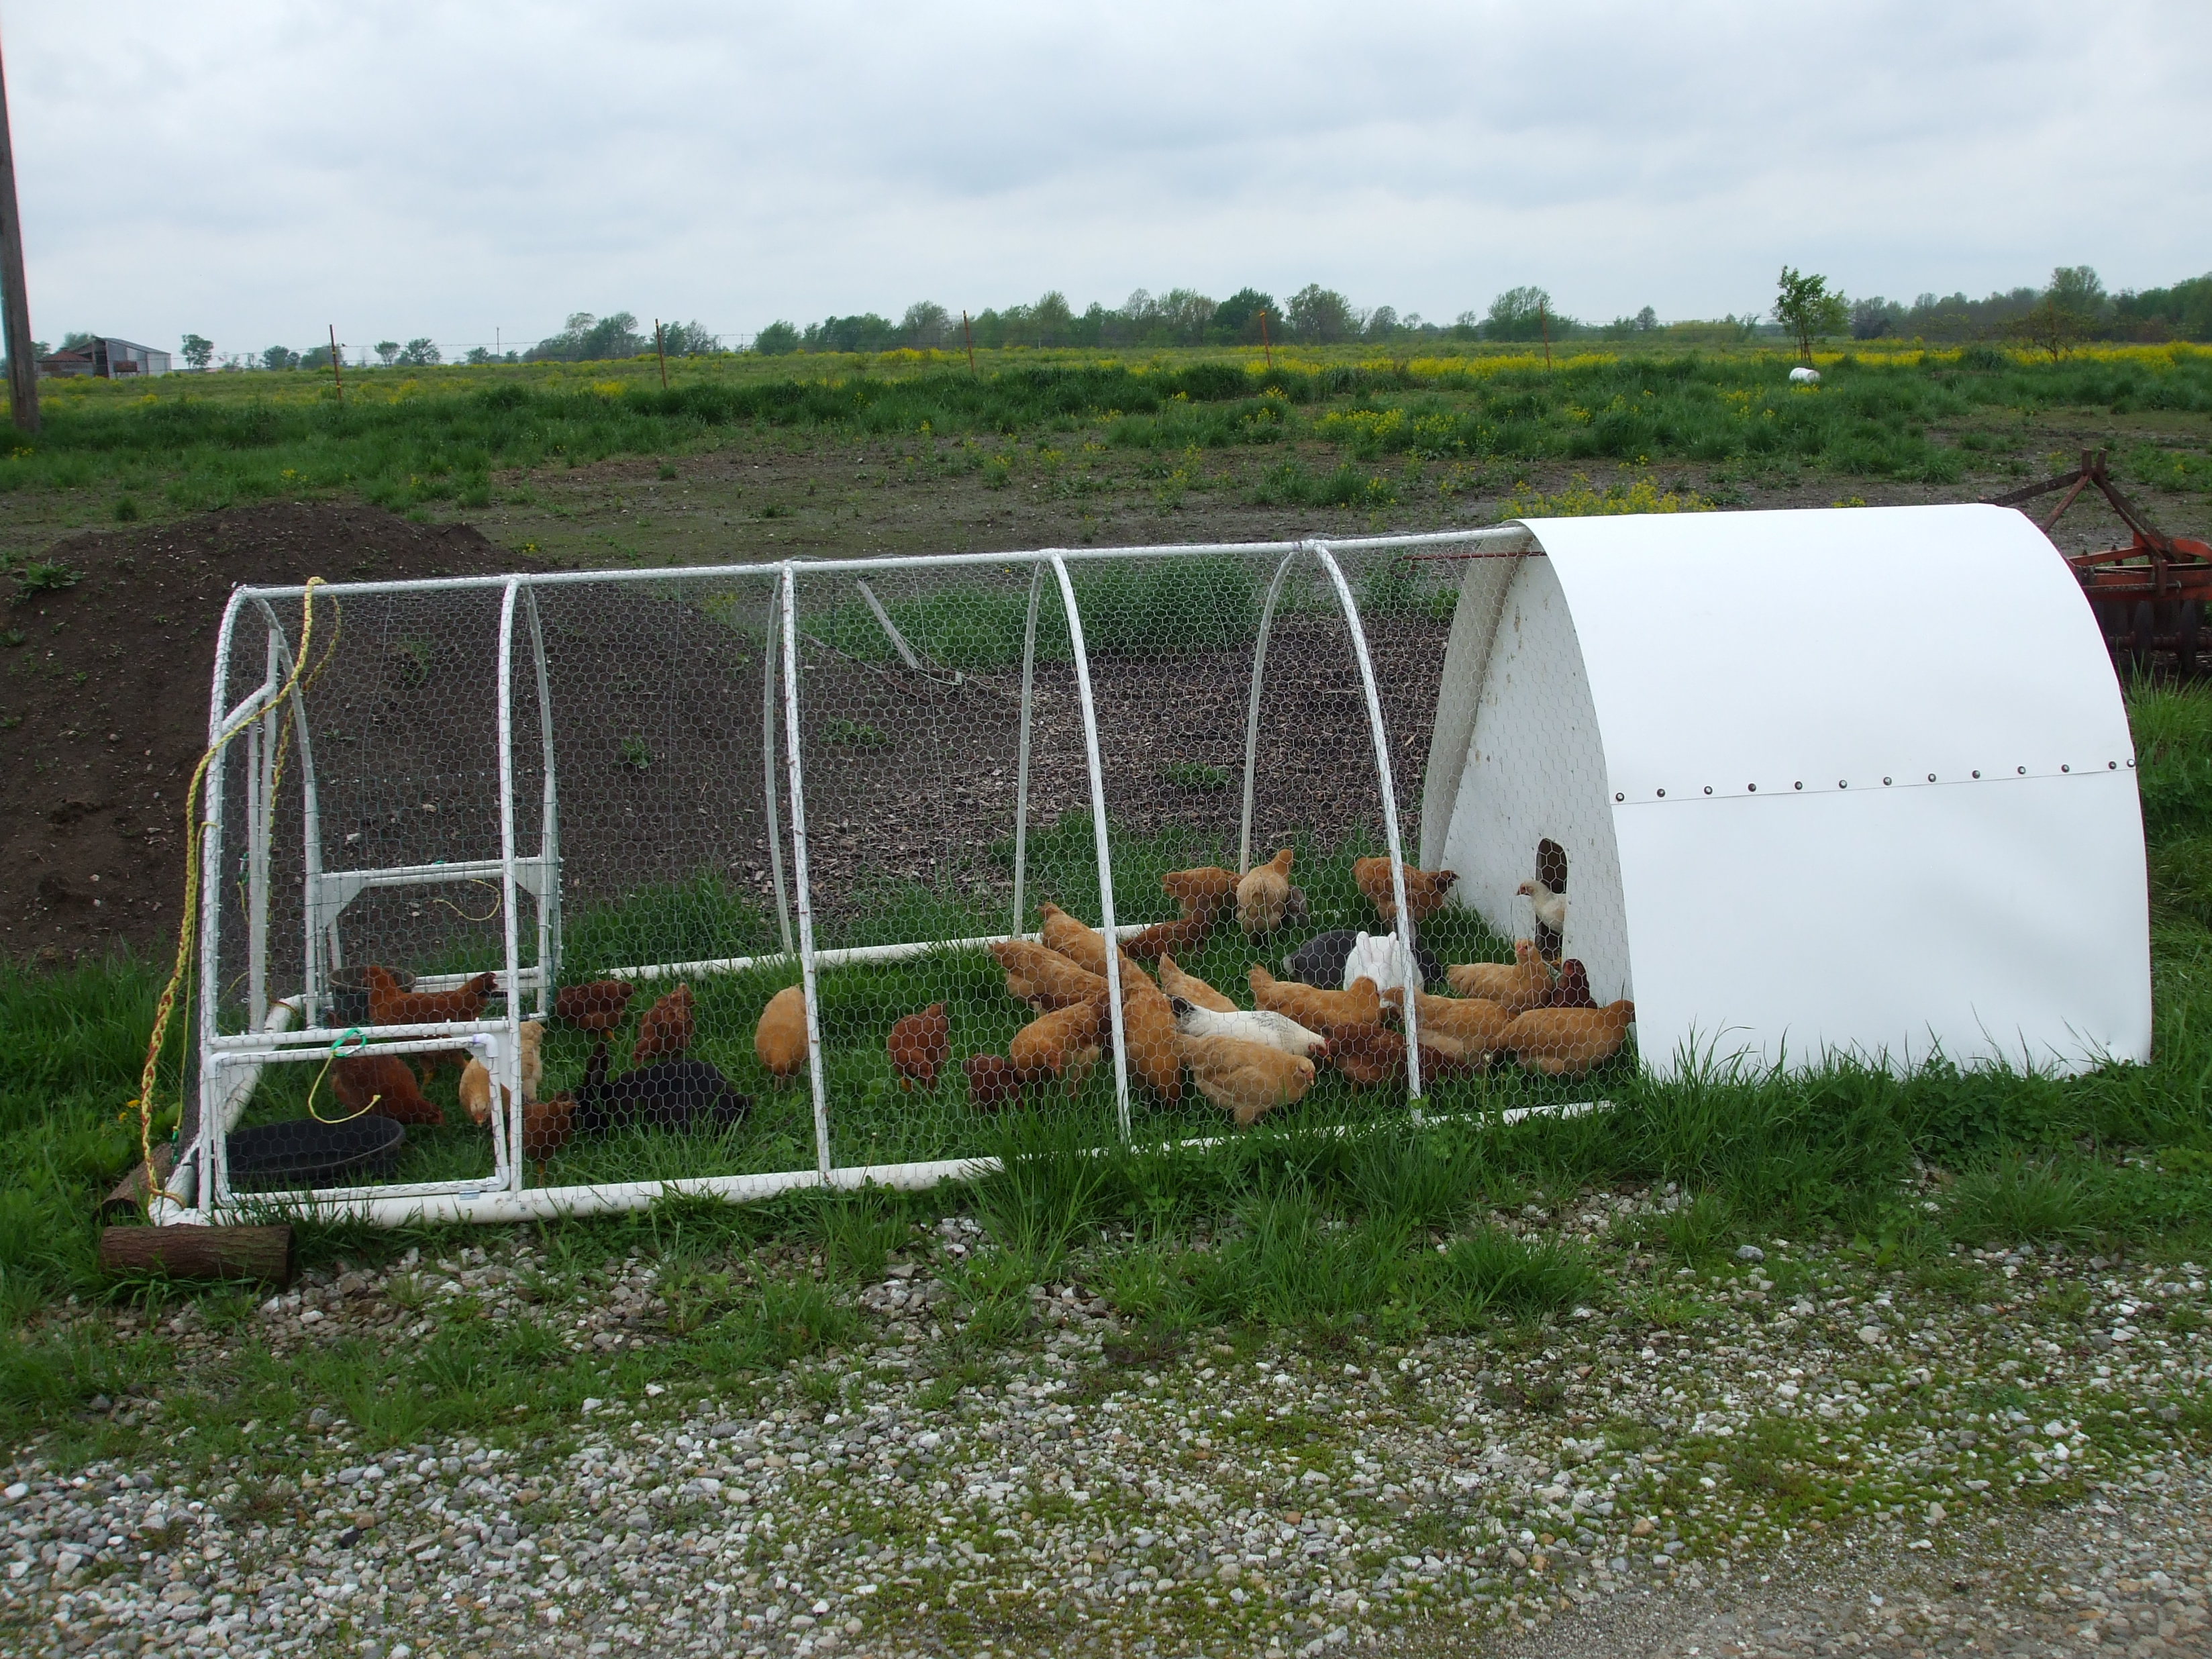 Redesigned Original PVC Chicken Tractor - Lewis Family Farm